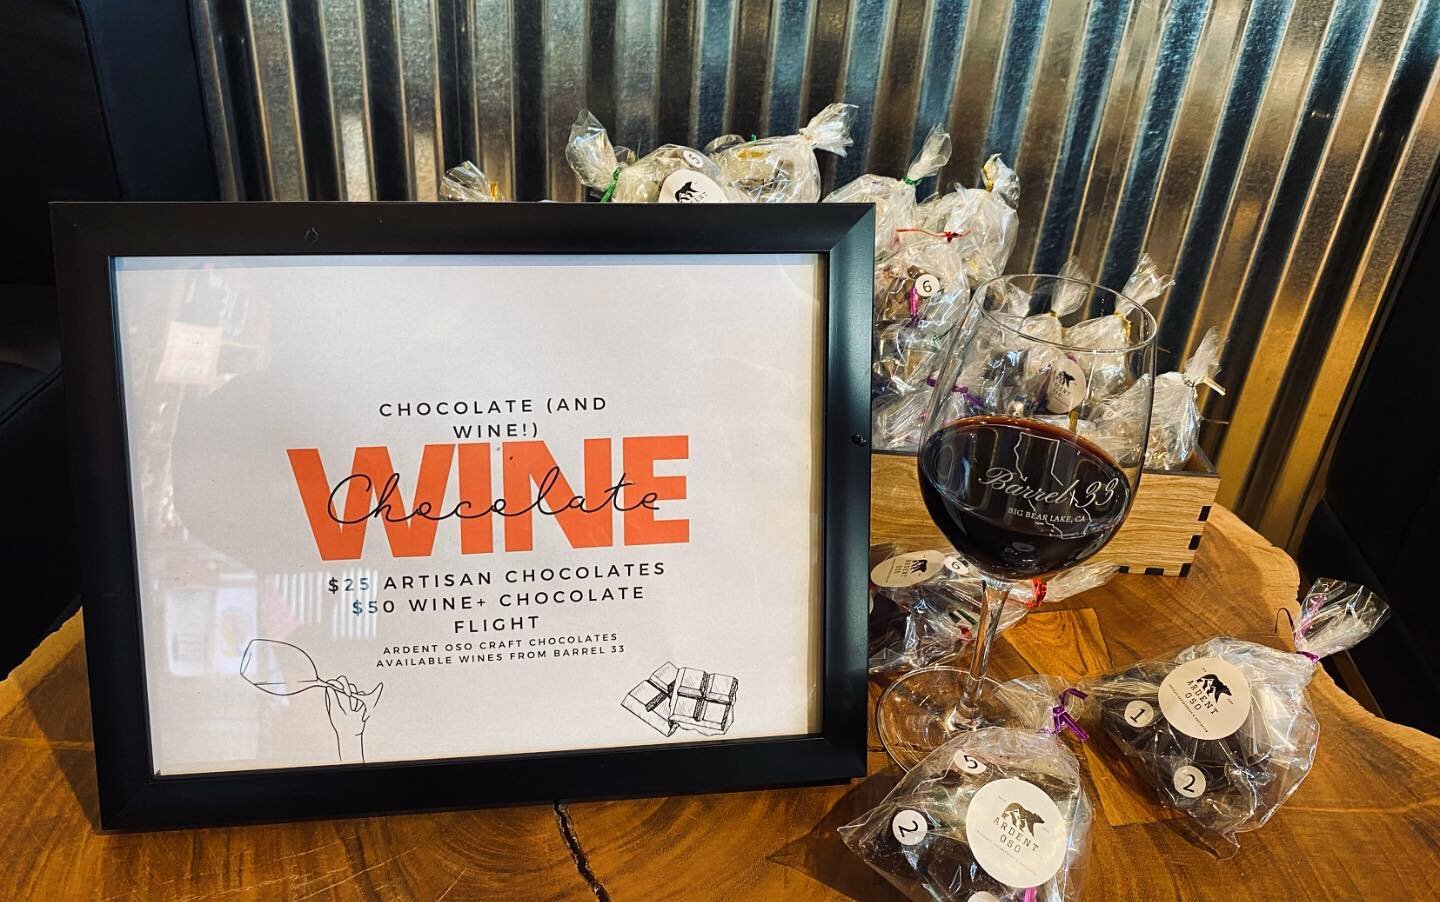 Unique Wines &amp; Artisan Chocolate Pairing for $50 and if you want to ditch the wine, the Chocolate is $25! This will continue while supplies last ! 🍷#ardentoso